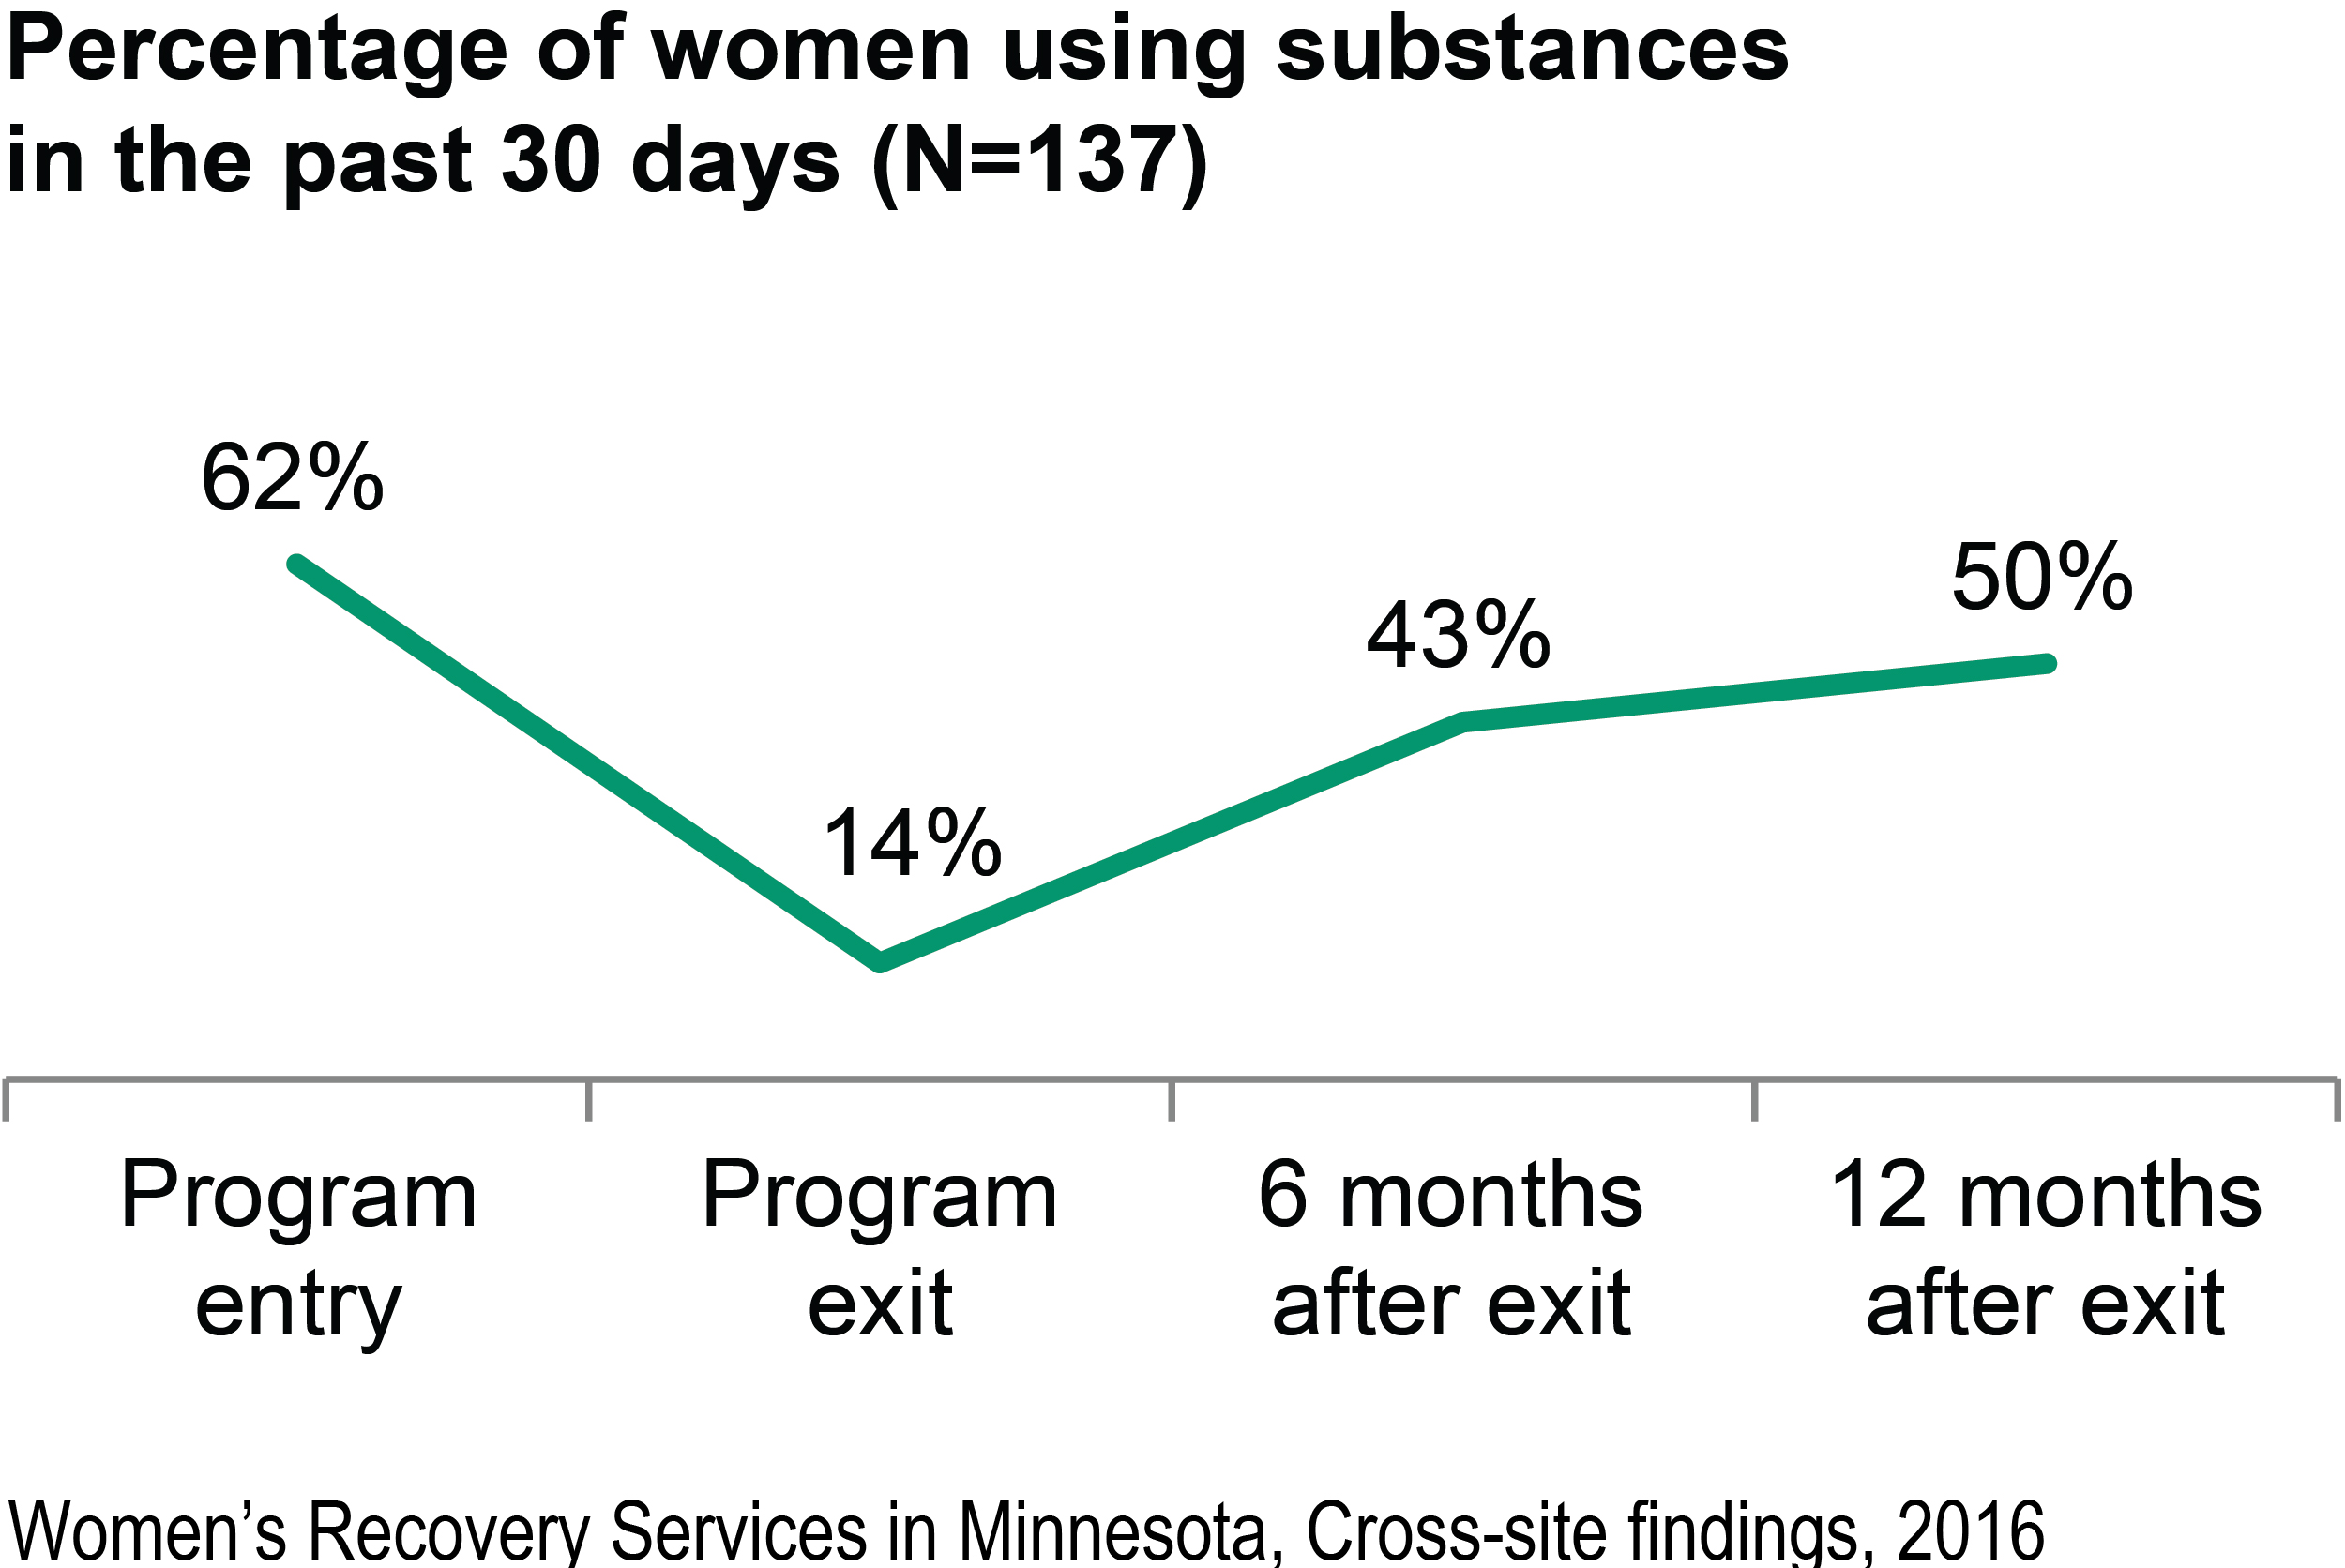 A line graph shows that the percentage of women using substances dropped from 62% at program entry to 14% at program exit. However, women reporting substance use increased again to 43% six months after exit, and 50% one year after exit.